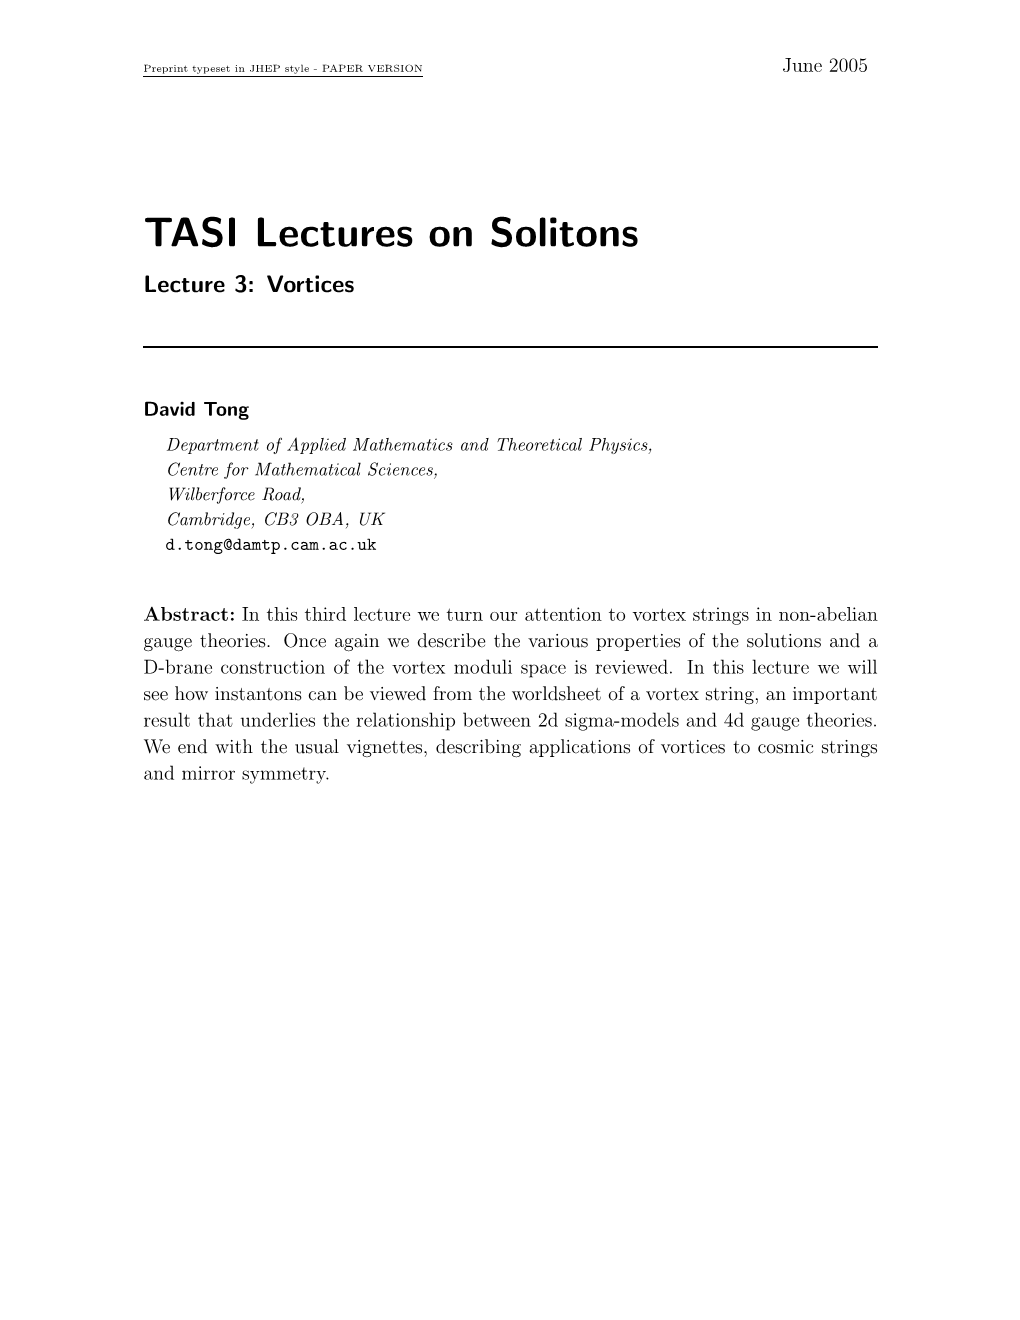 TASI Lectures on Solitons Lecture 3: Vortices